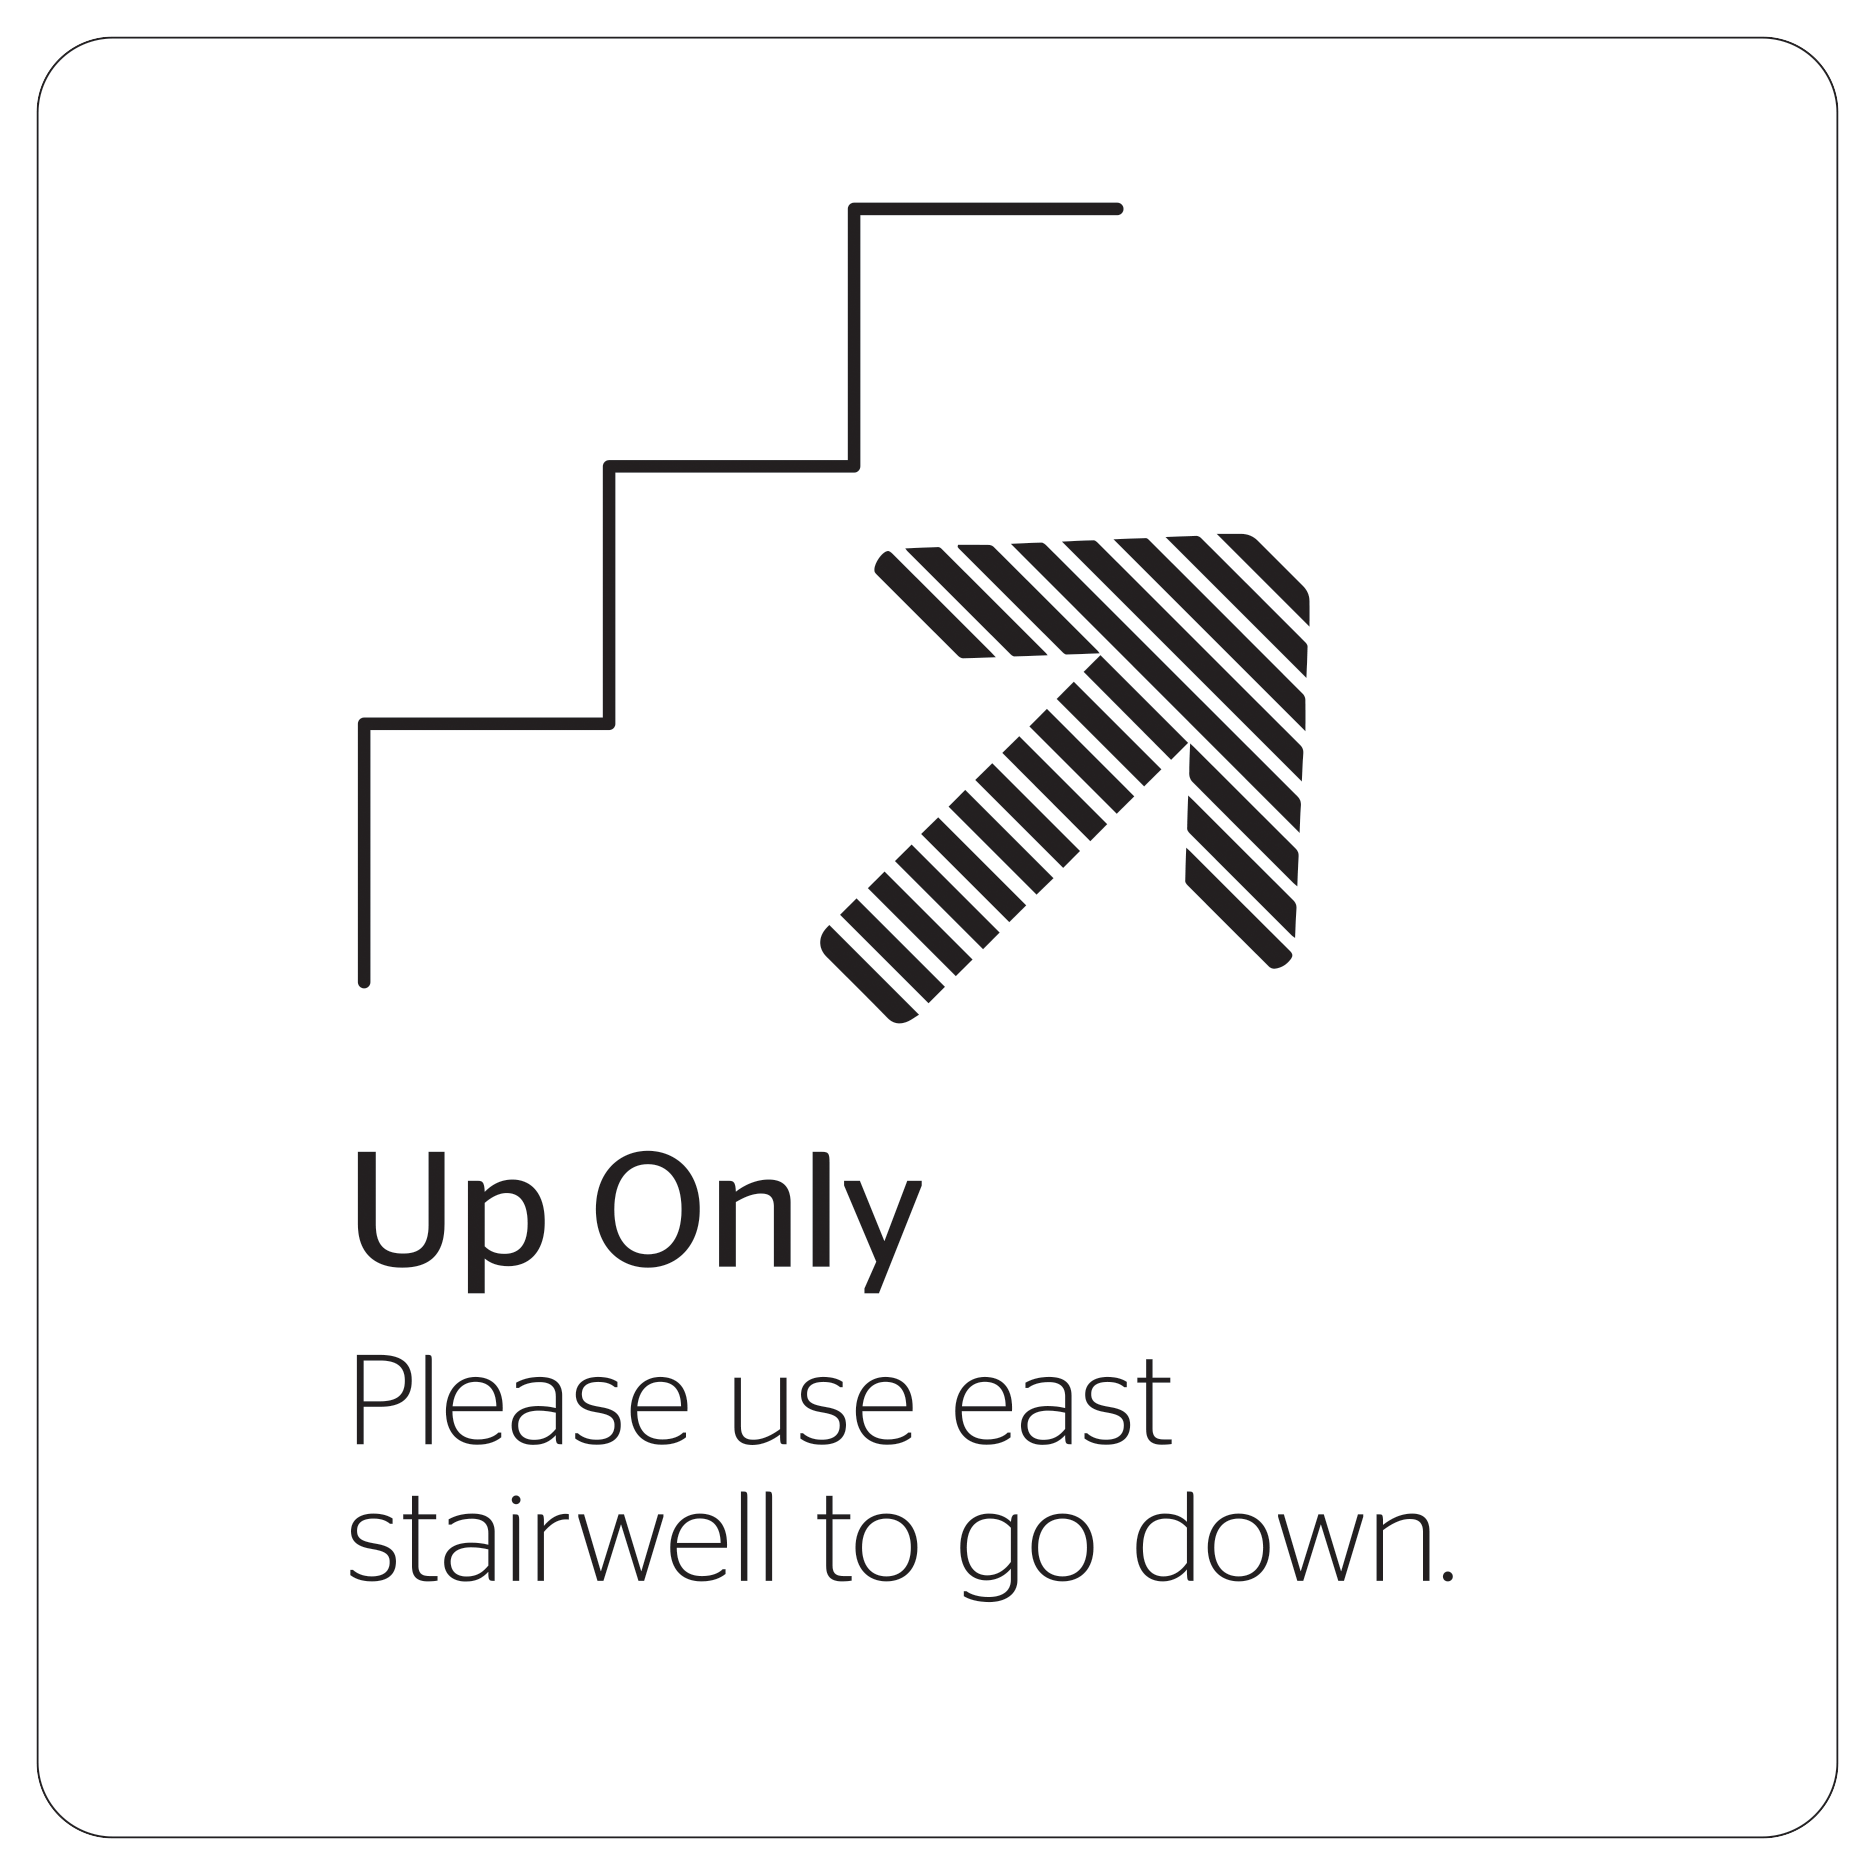 More folks will be taking the stairs to stay safe. Install stairwell signs to help with the flow of traffic while reducing the risk of transmission.